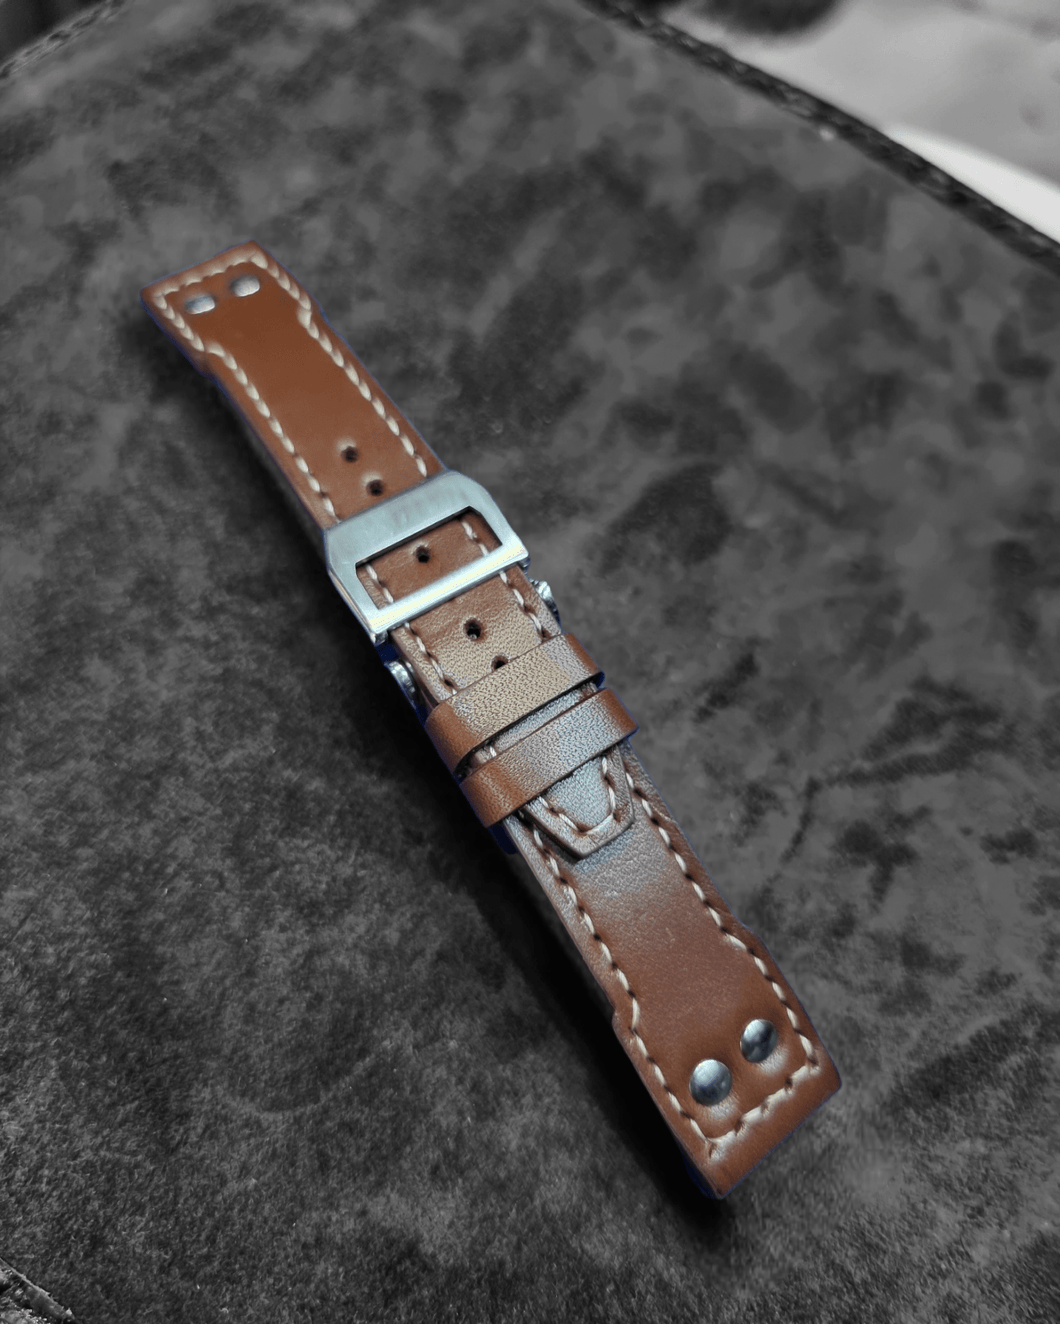 Indianleathercraft Watch Bands 20/18mm Handmade IWC brown leather strap